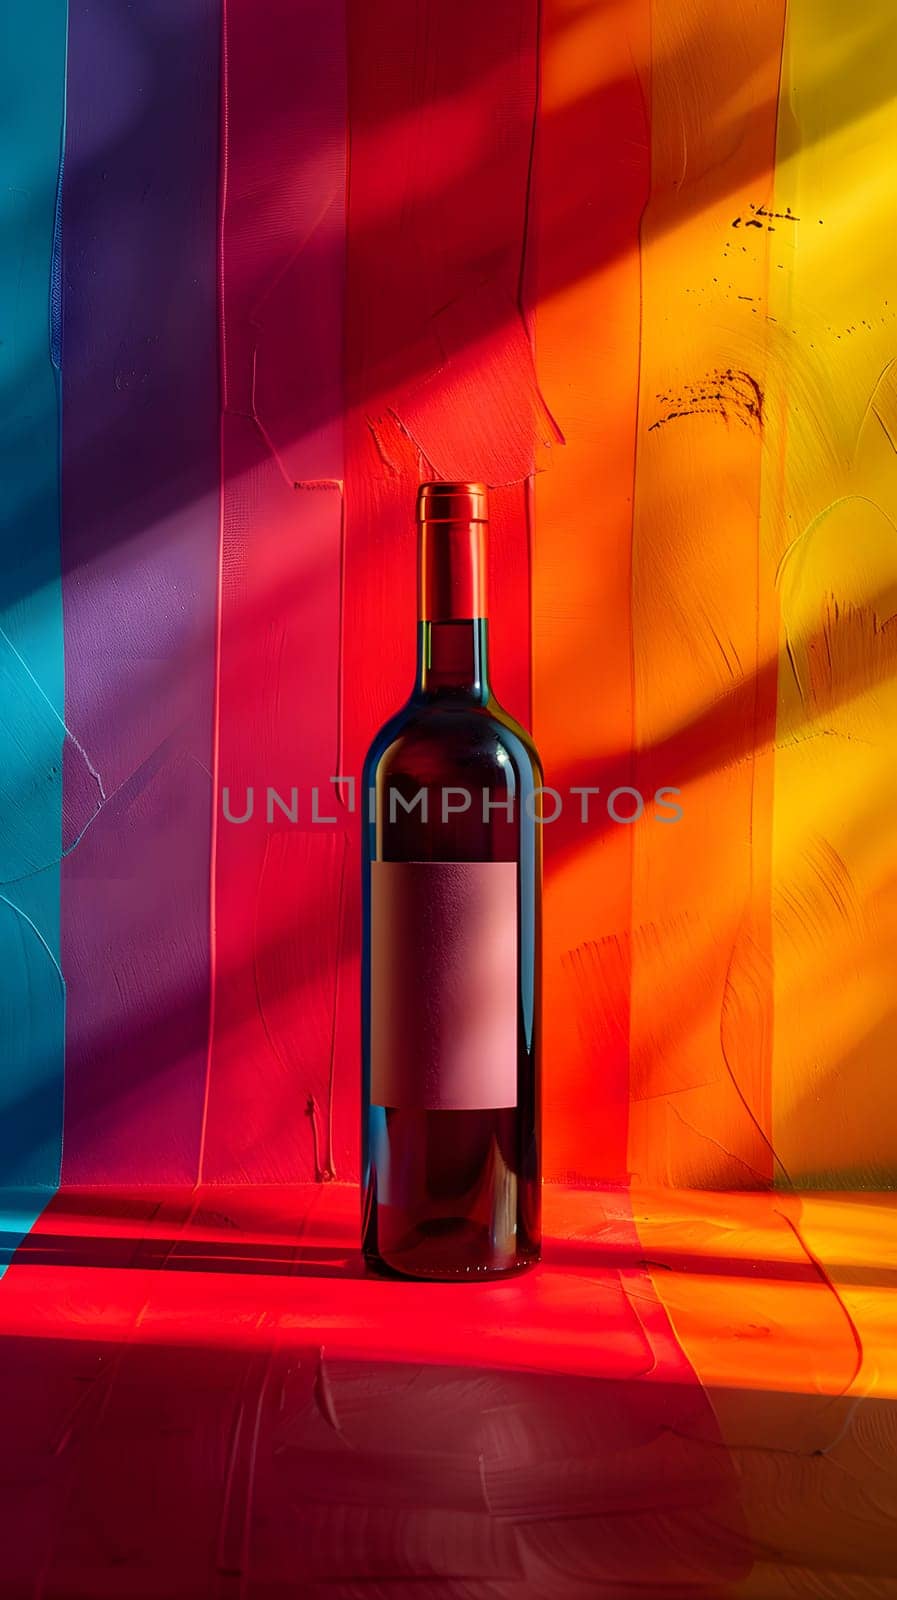 A glass bottle of purple liquid sits on a table in front of a rainbow flag, with a cork bottle stopper saver. It is likely a bottle of wine, ready to be enjoyed as a refreshing drink